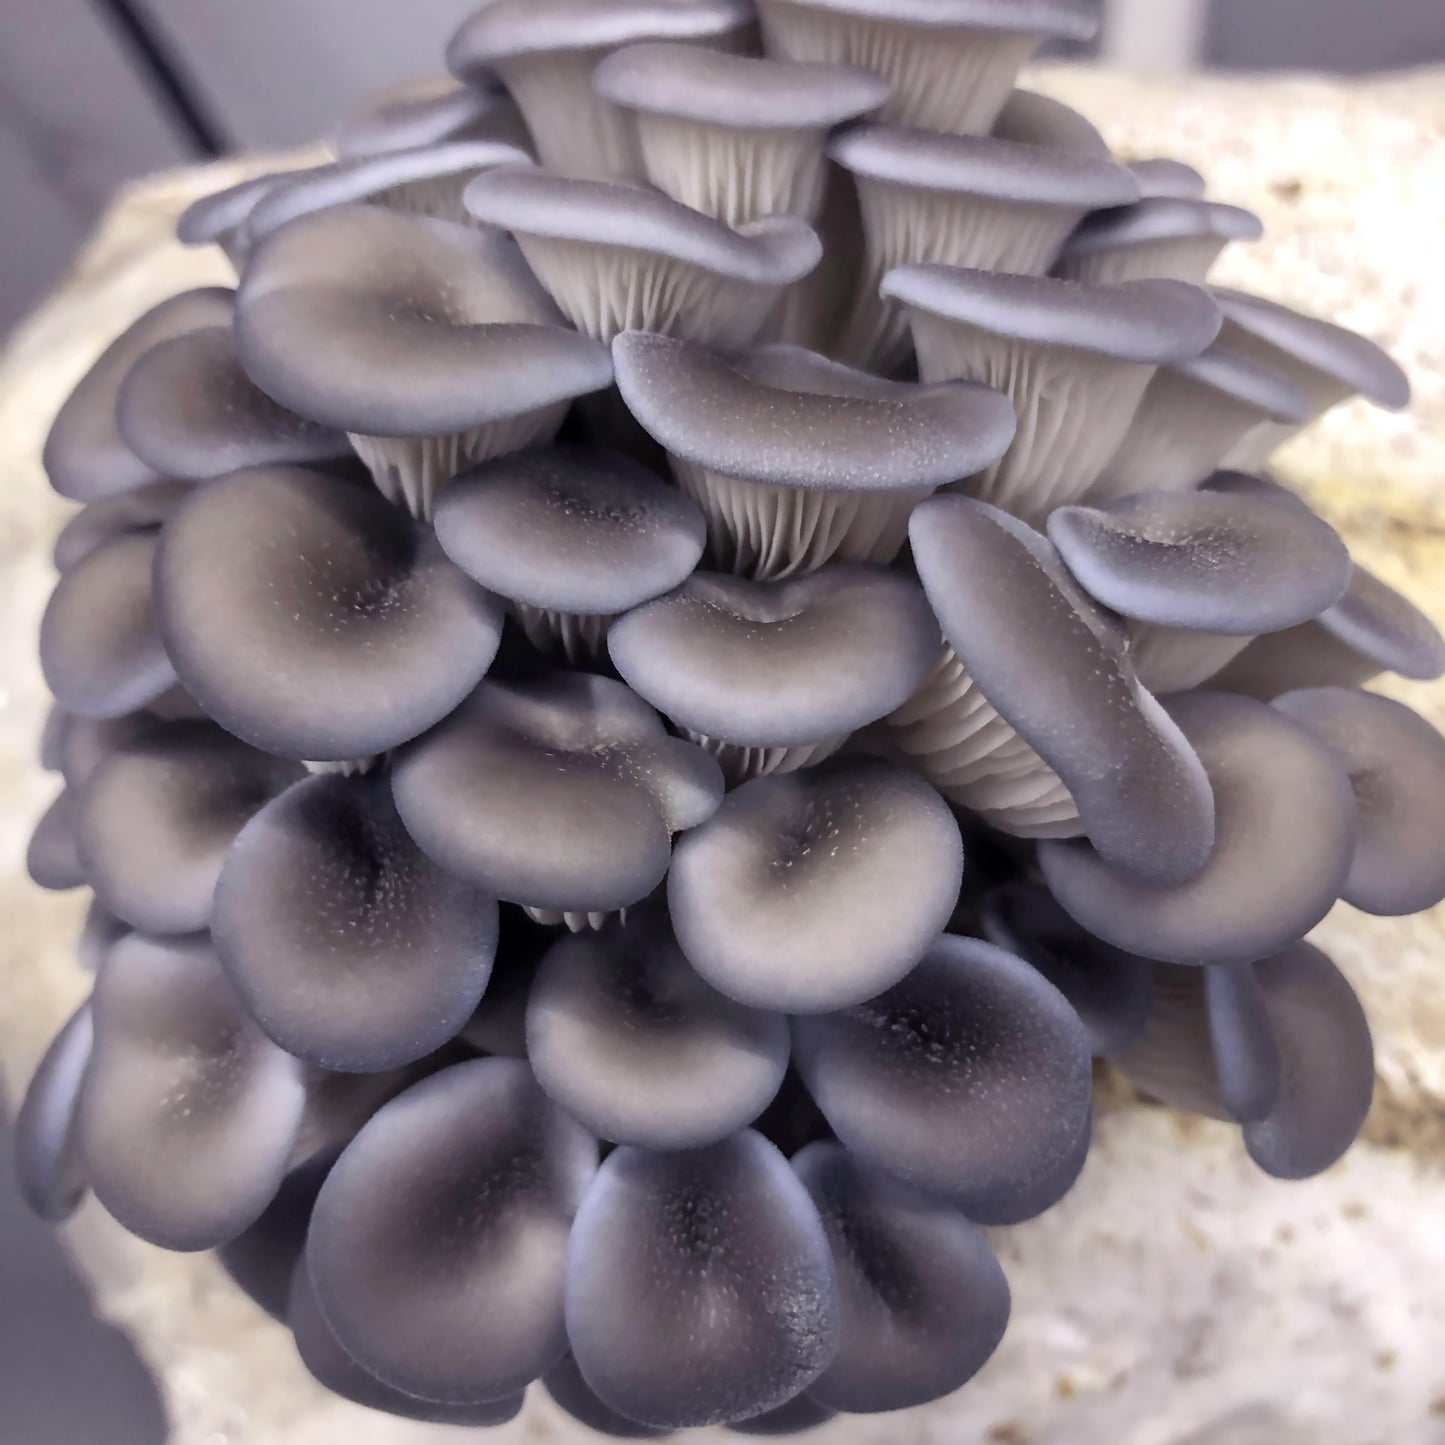 Grow Your Own Blue Oyster Mushrooms - Warm Variety